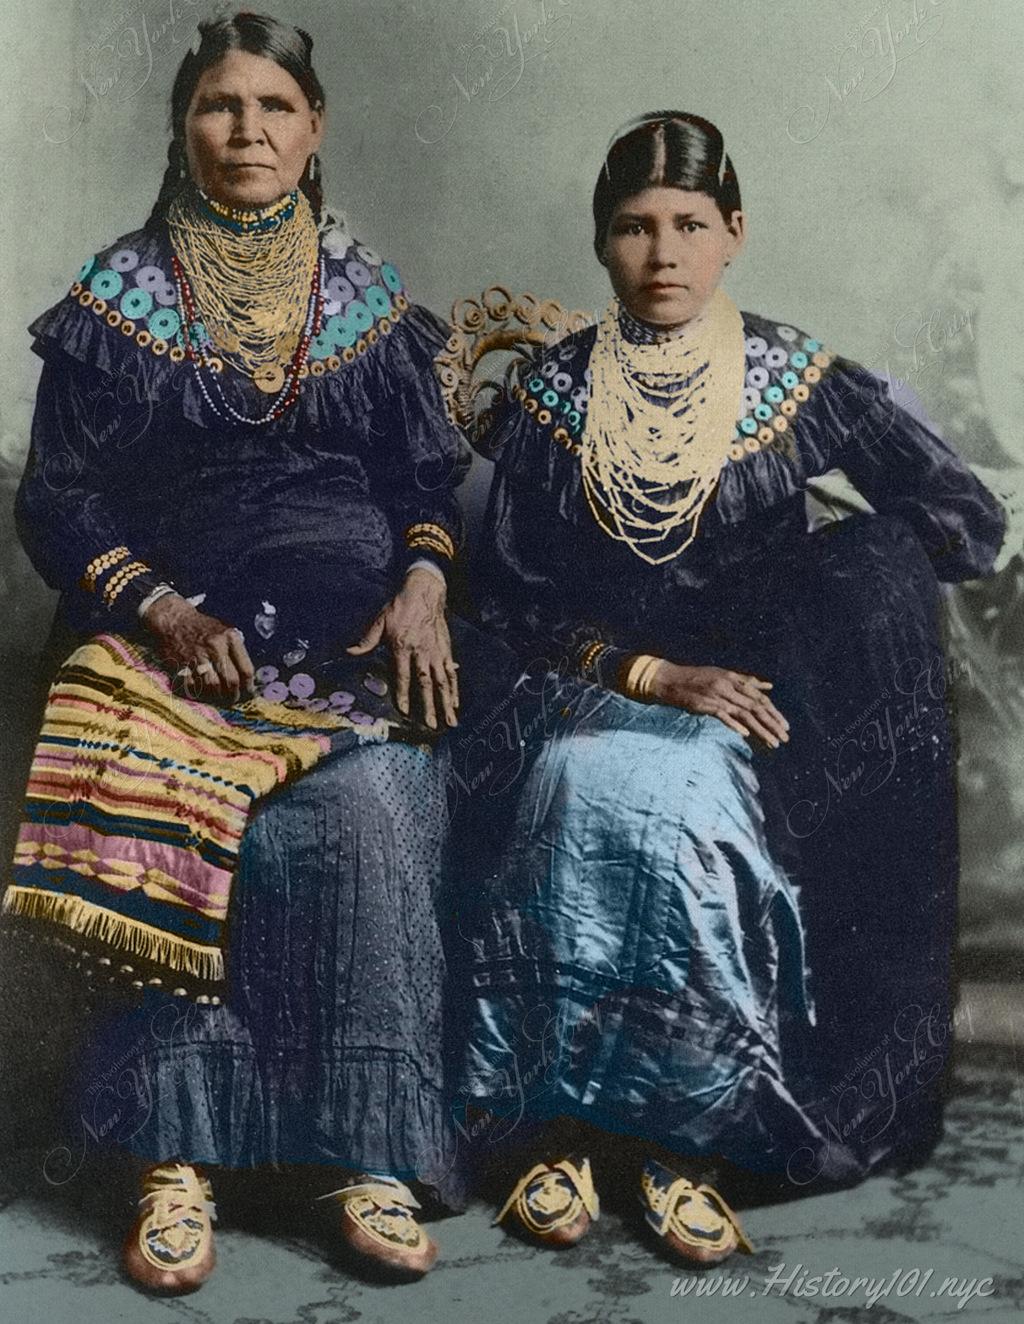 Colorized photograph of a mother and daughter of the Lenape tribe - the last of New York City's indigenous inhabitants at the turn of the century.